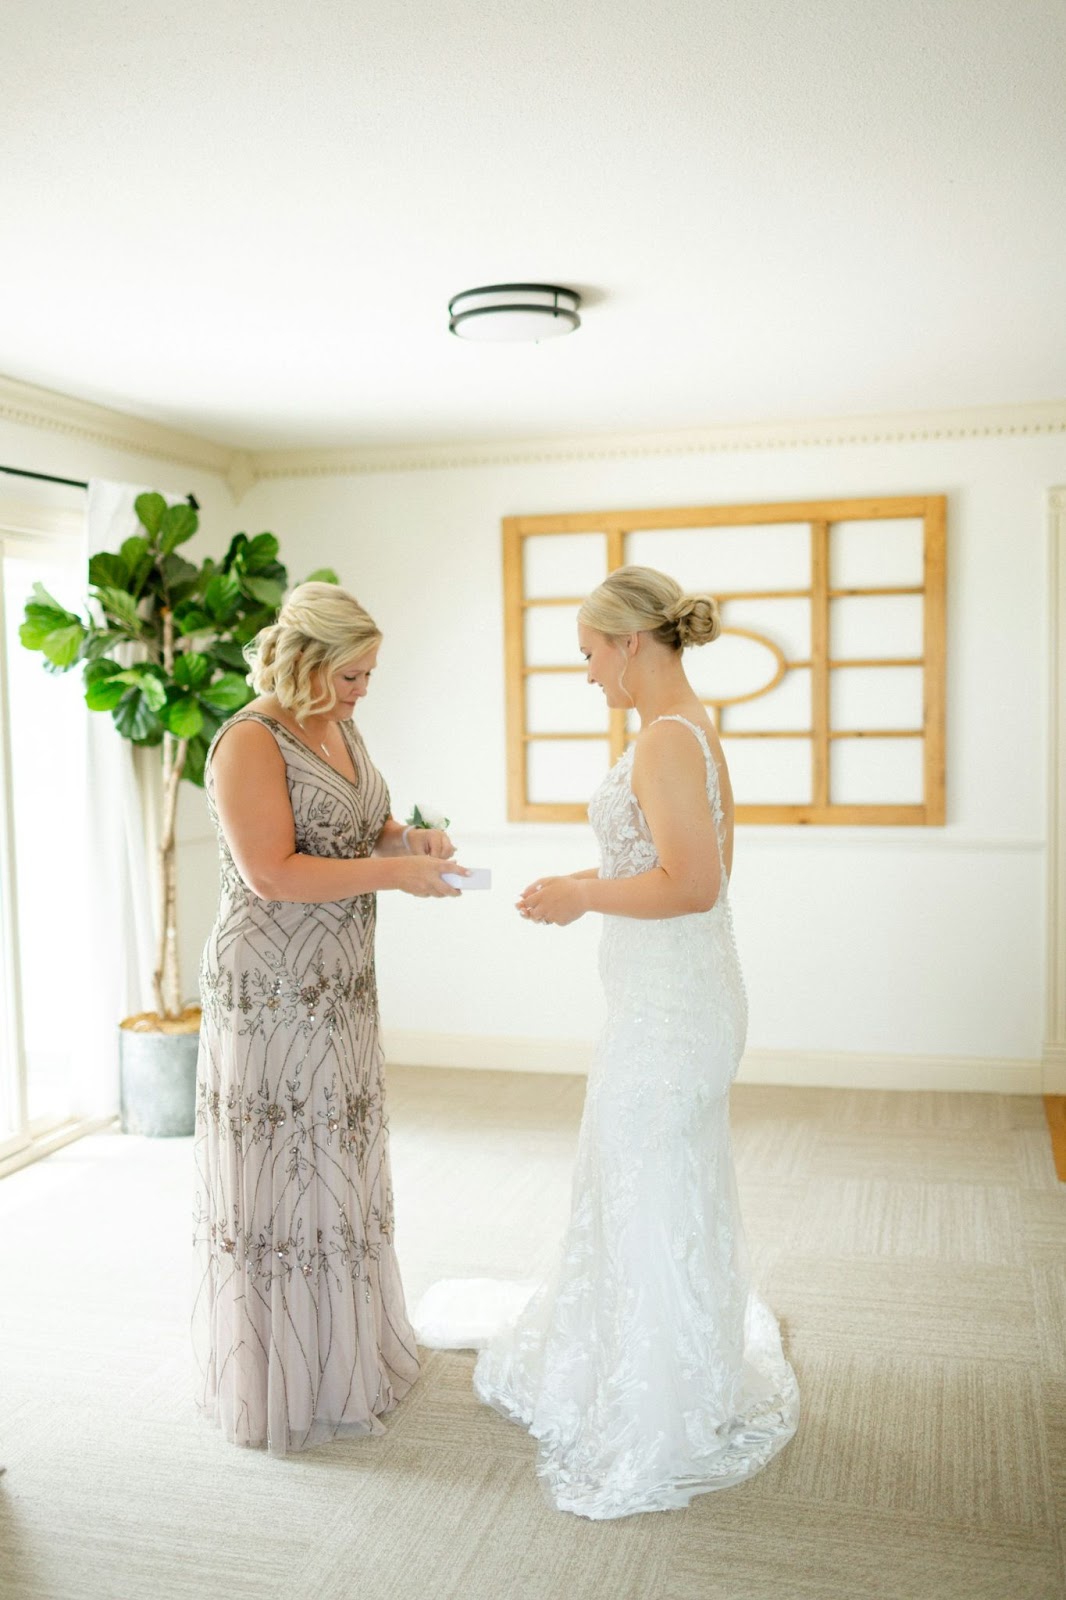 A bride receiving a gift on her wedding day from her bridesmaid or mother.